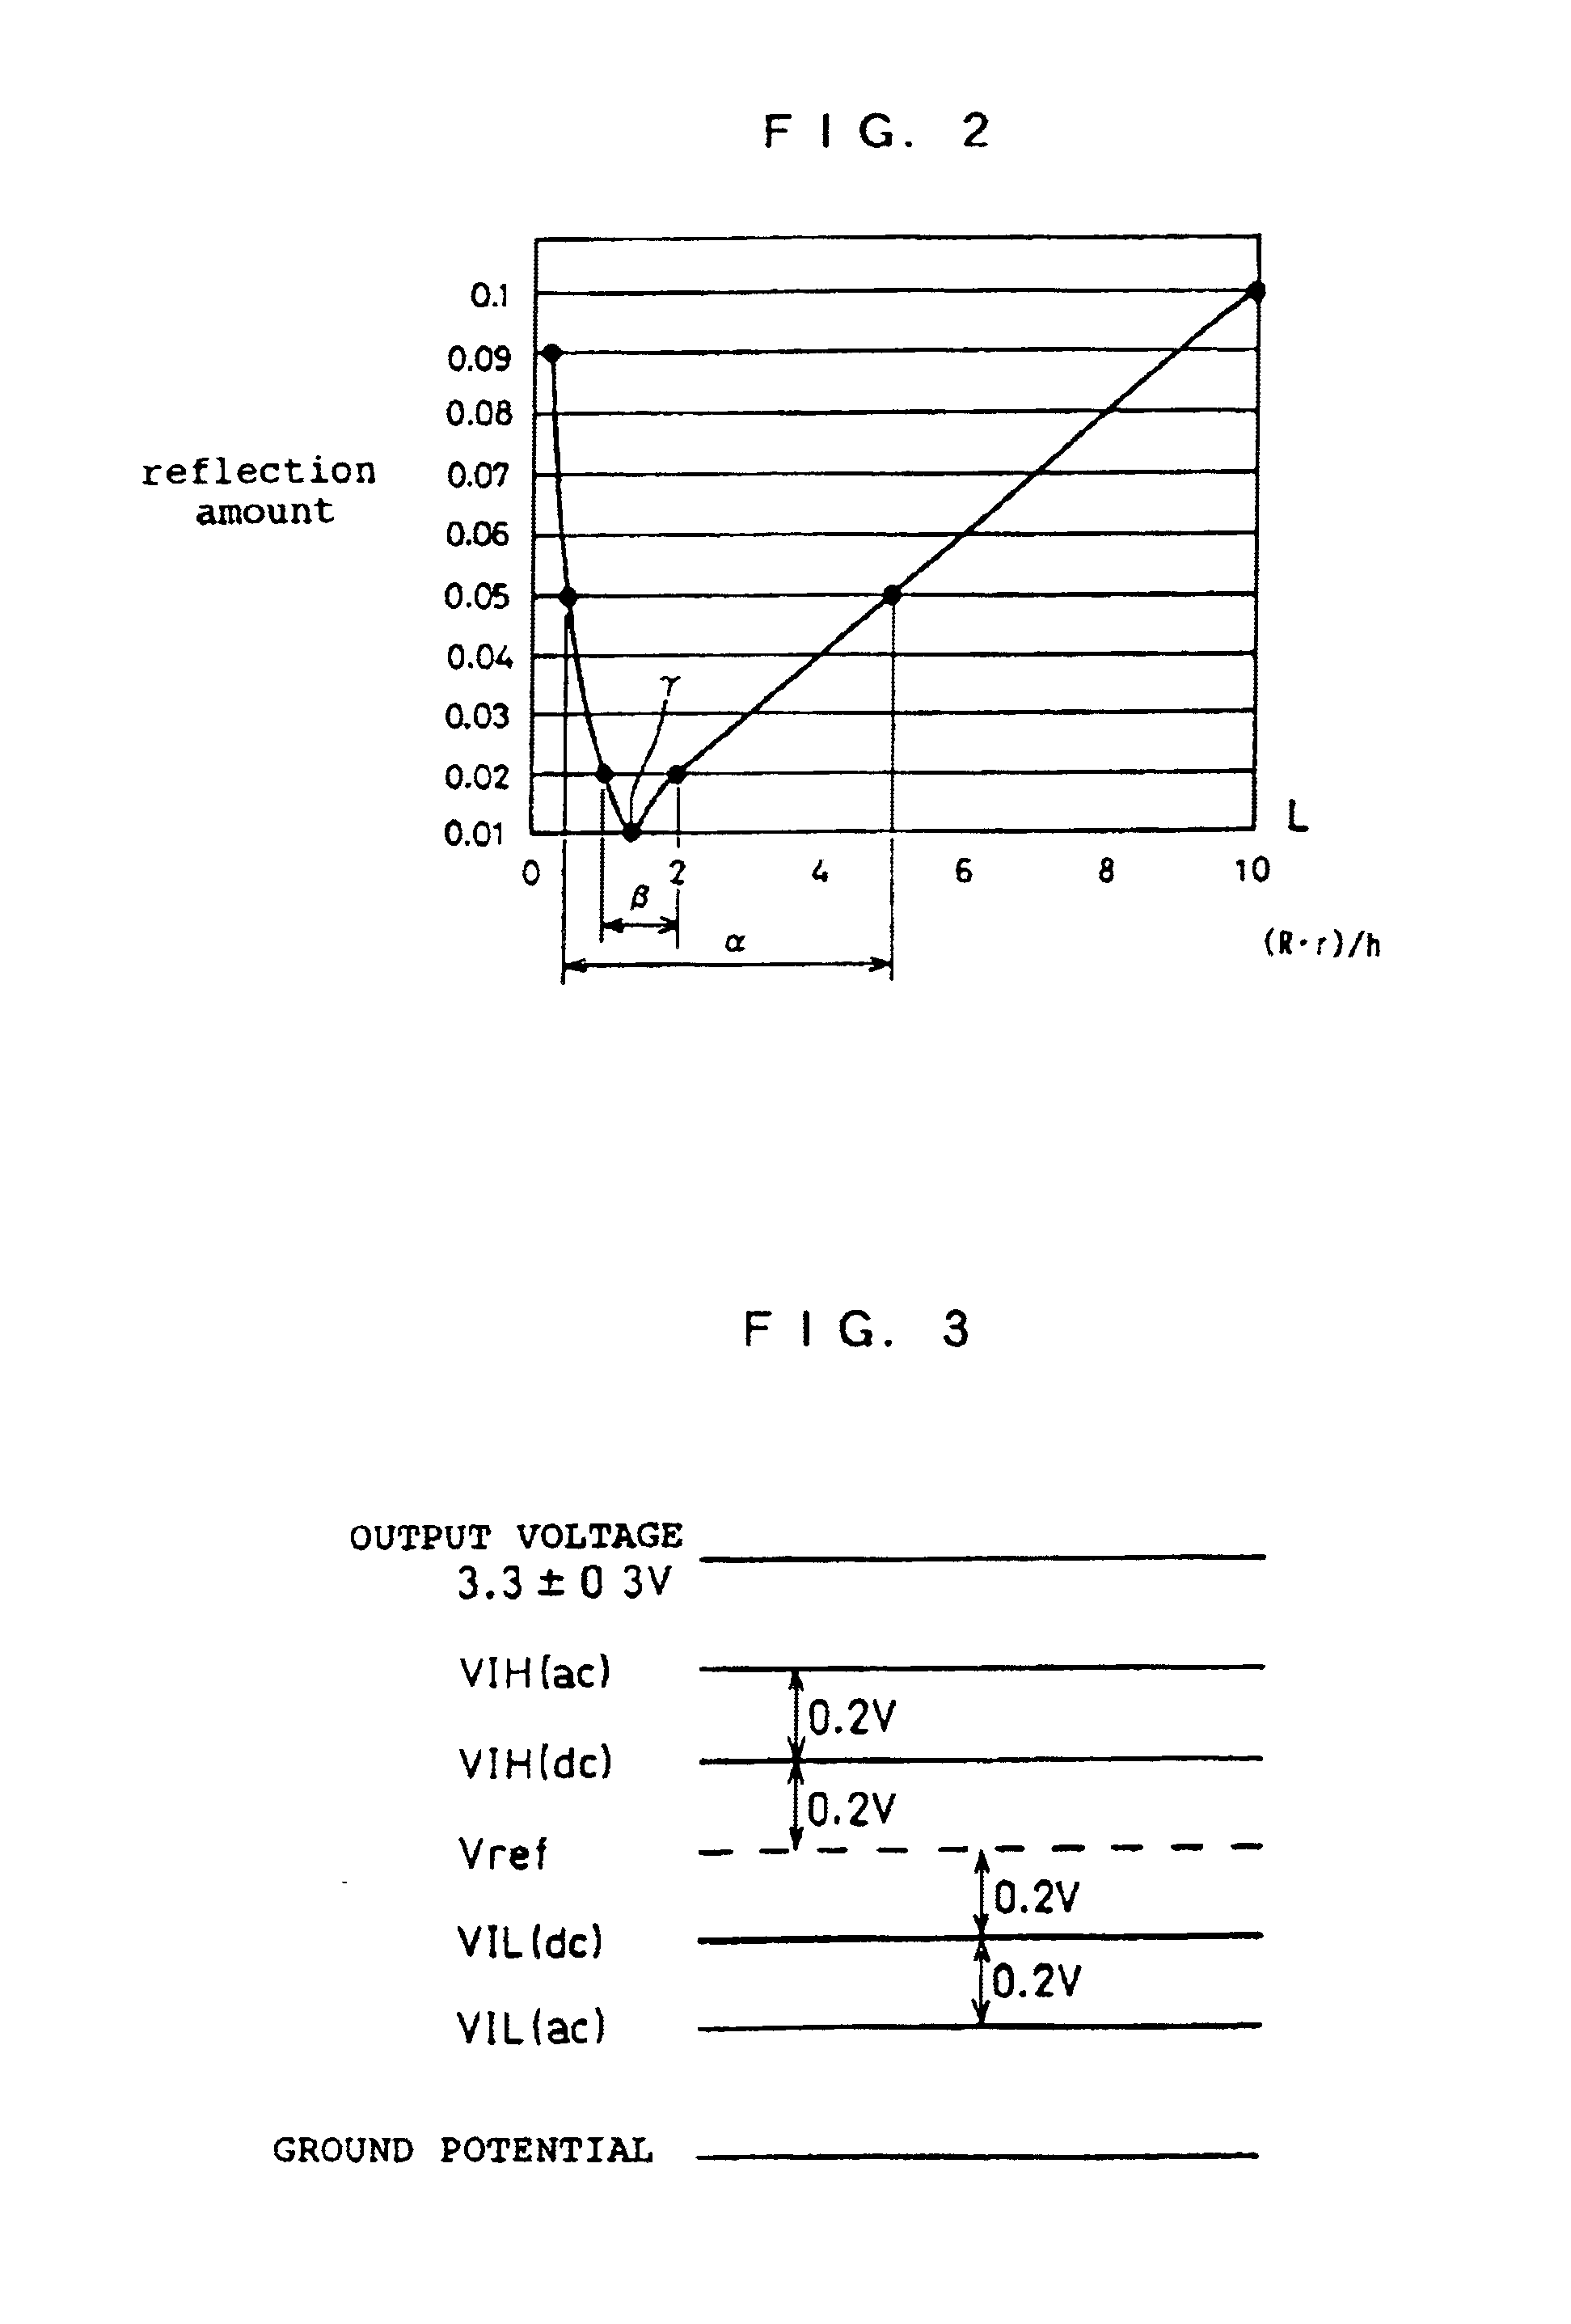 Multi-level circuit substrate, method for manufacturing same and method for adjusting a characteristic impedance therefor